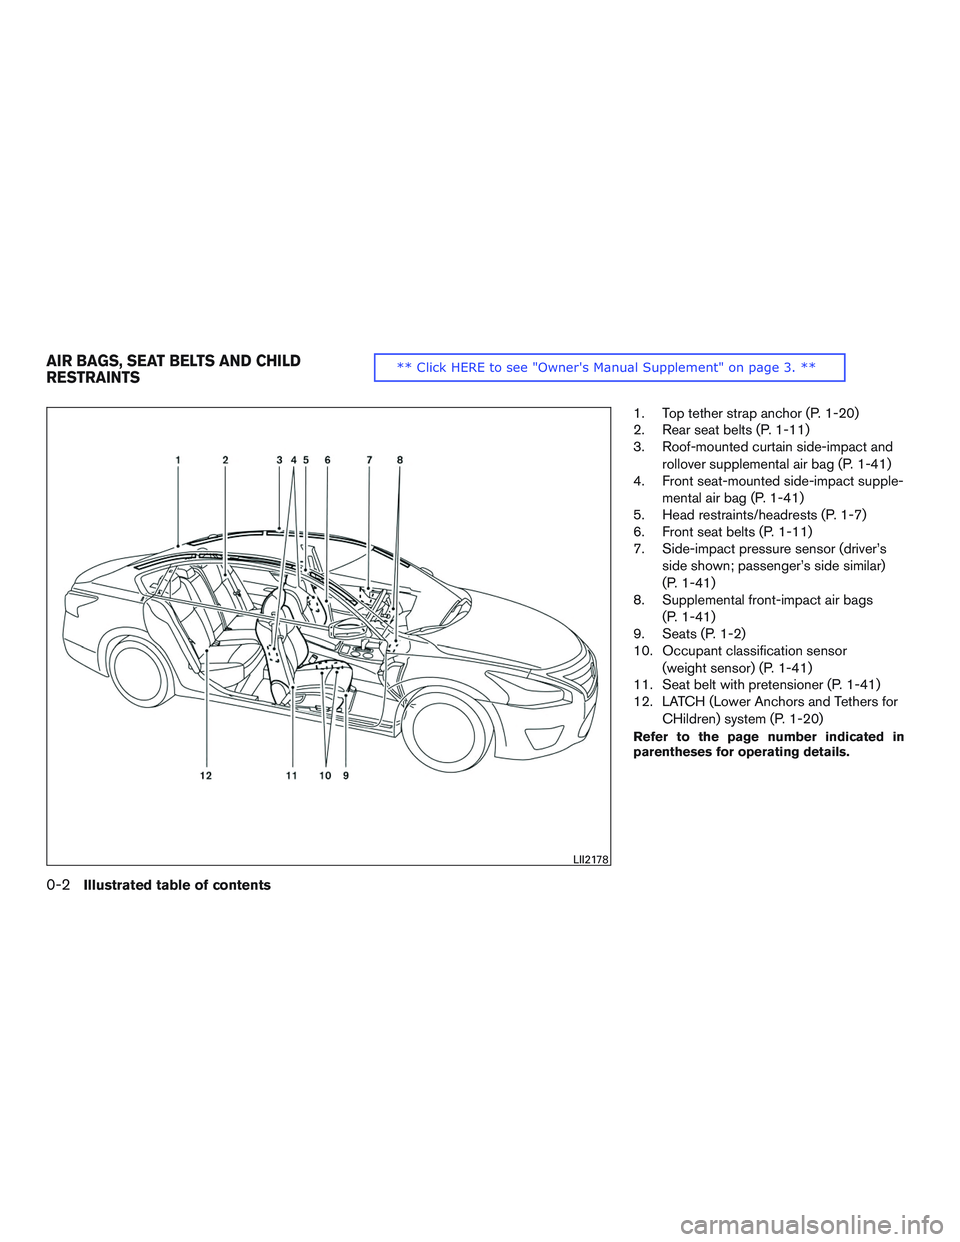 NISSAN ALTIMA SEDAN 2015  Owners Manual 1. Top tether strap anchor (P. 1-20)
2. Rear seat belts (P. 1-11)
3. Roof-mounted curtain side-impact androllover supplemental air bag (P. 1-41)
4. Front seat-mounted side-impact supple-
mental air ba